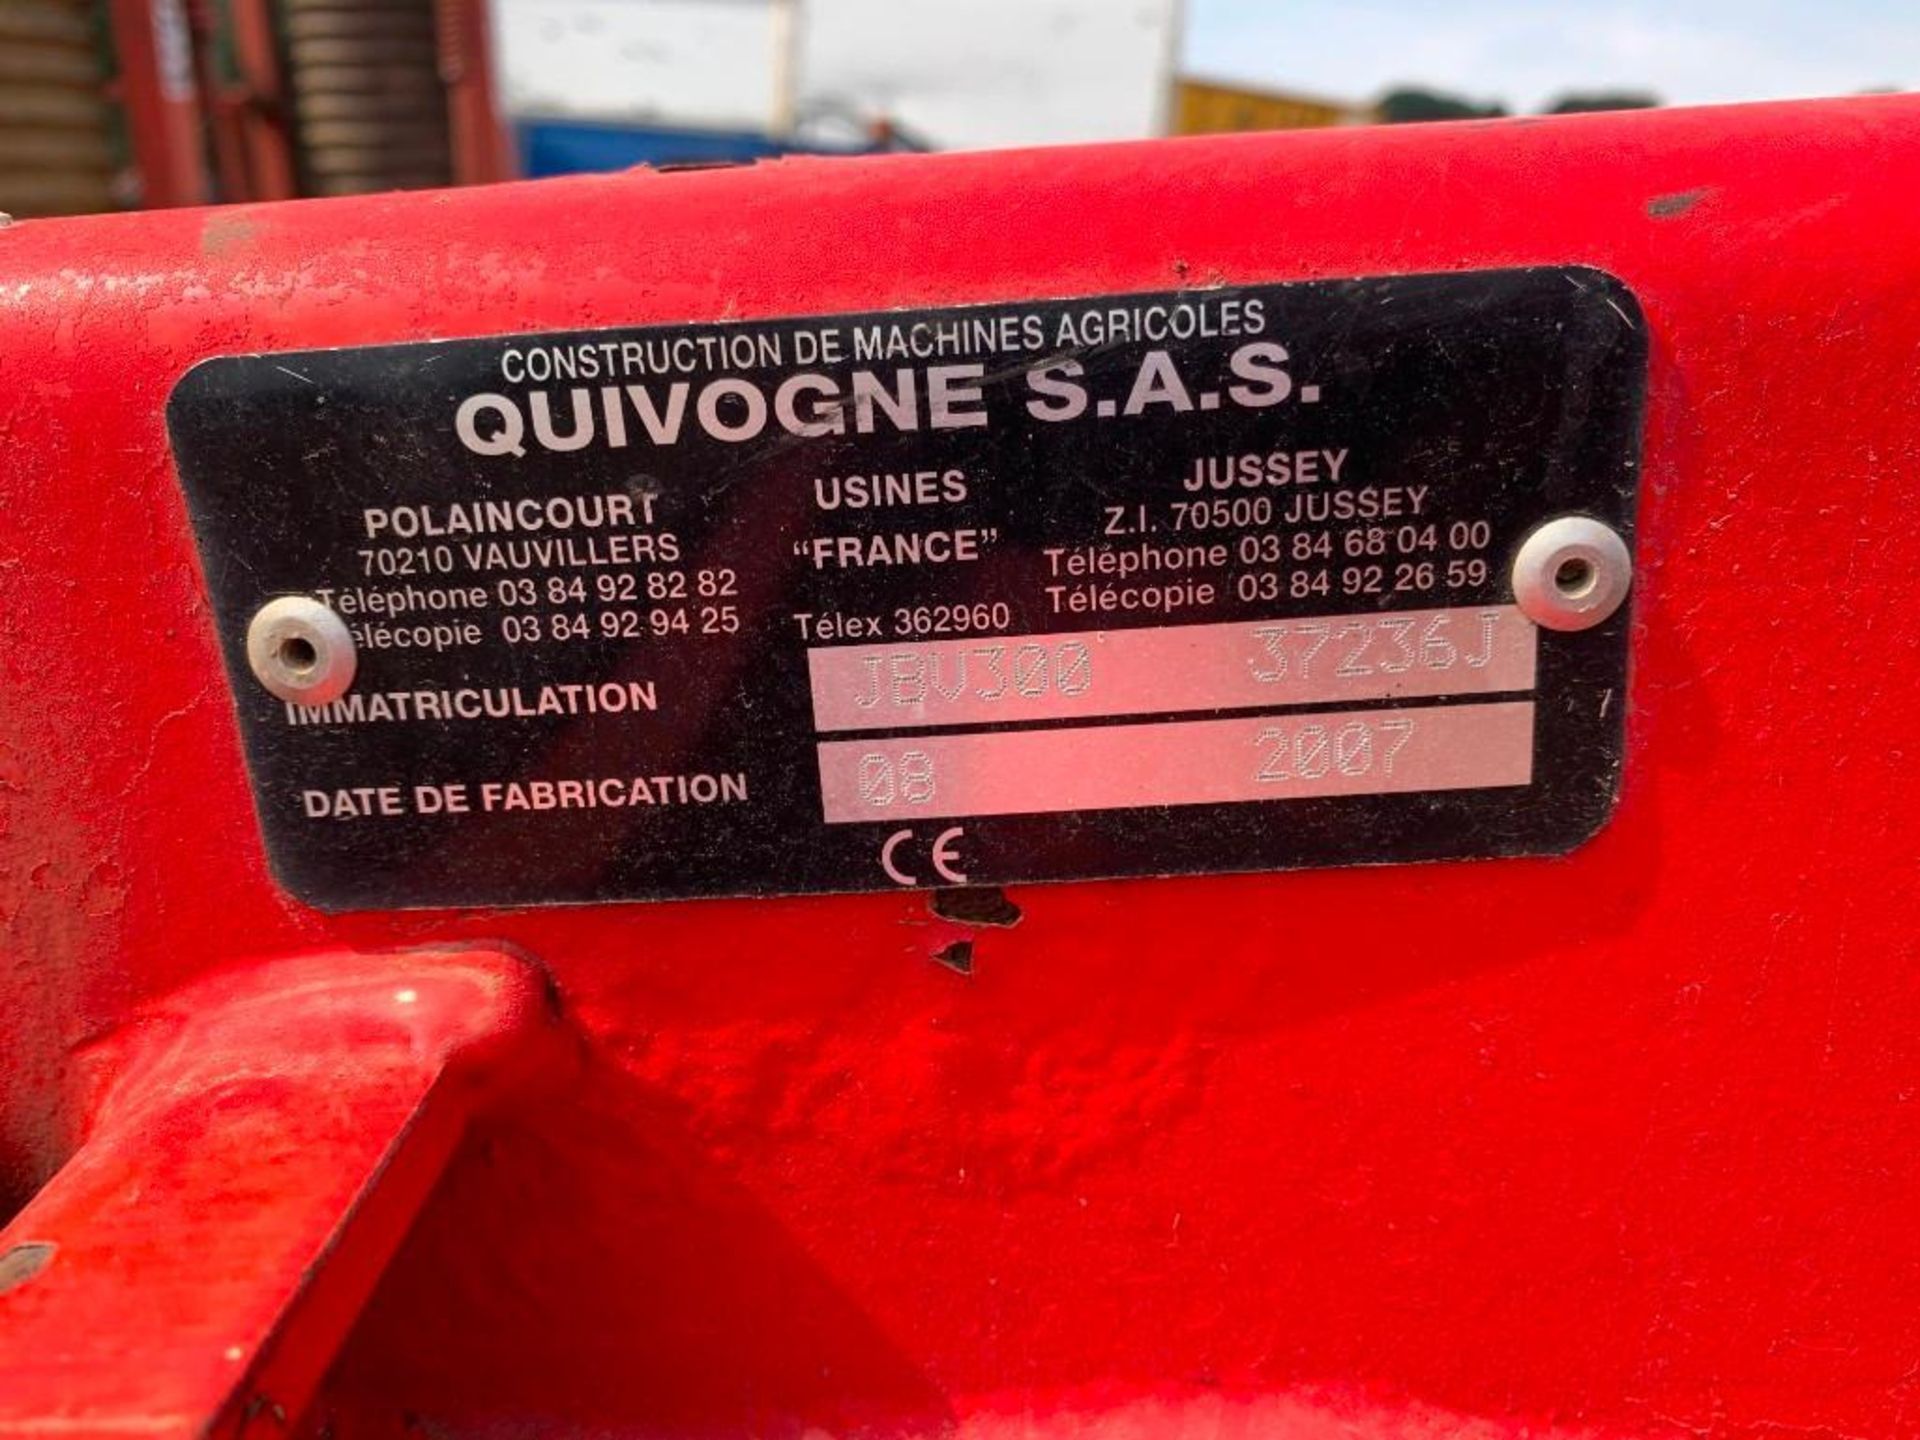 2007 Quivogne JBV Flail Mower 3m - Image 11 of 11